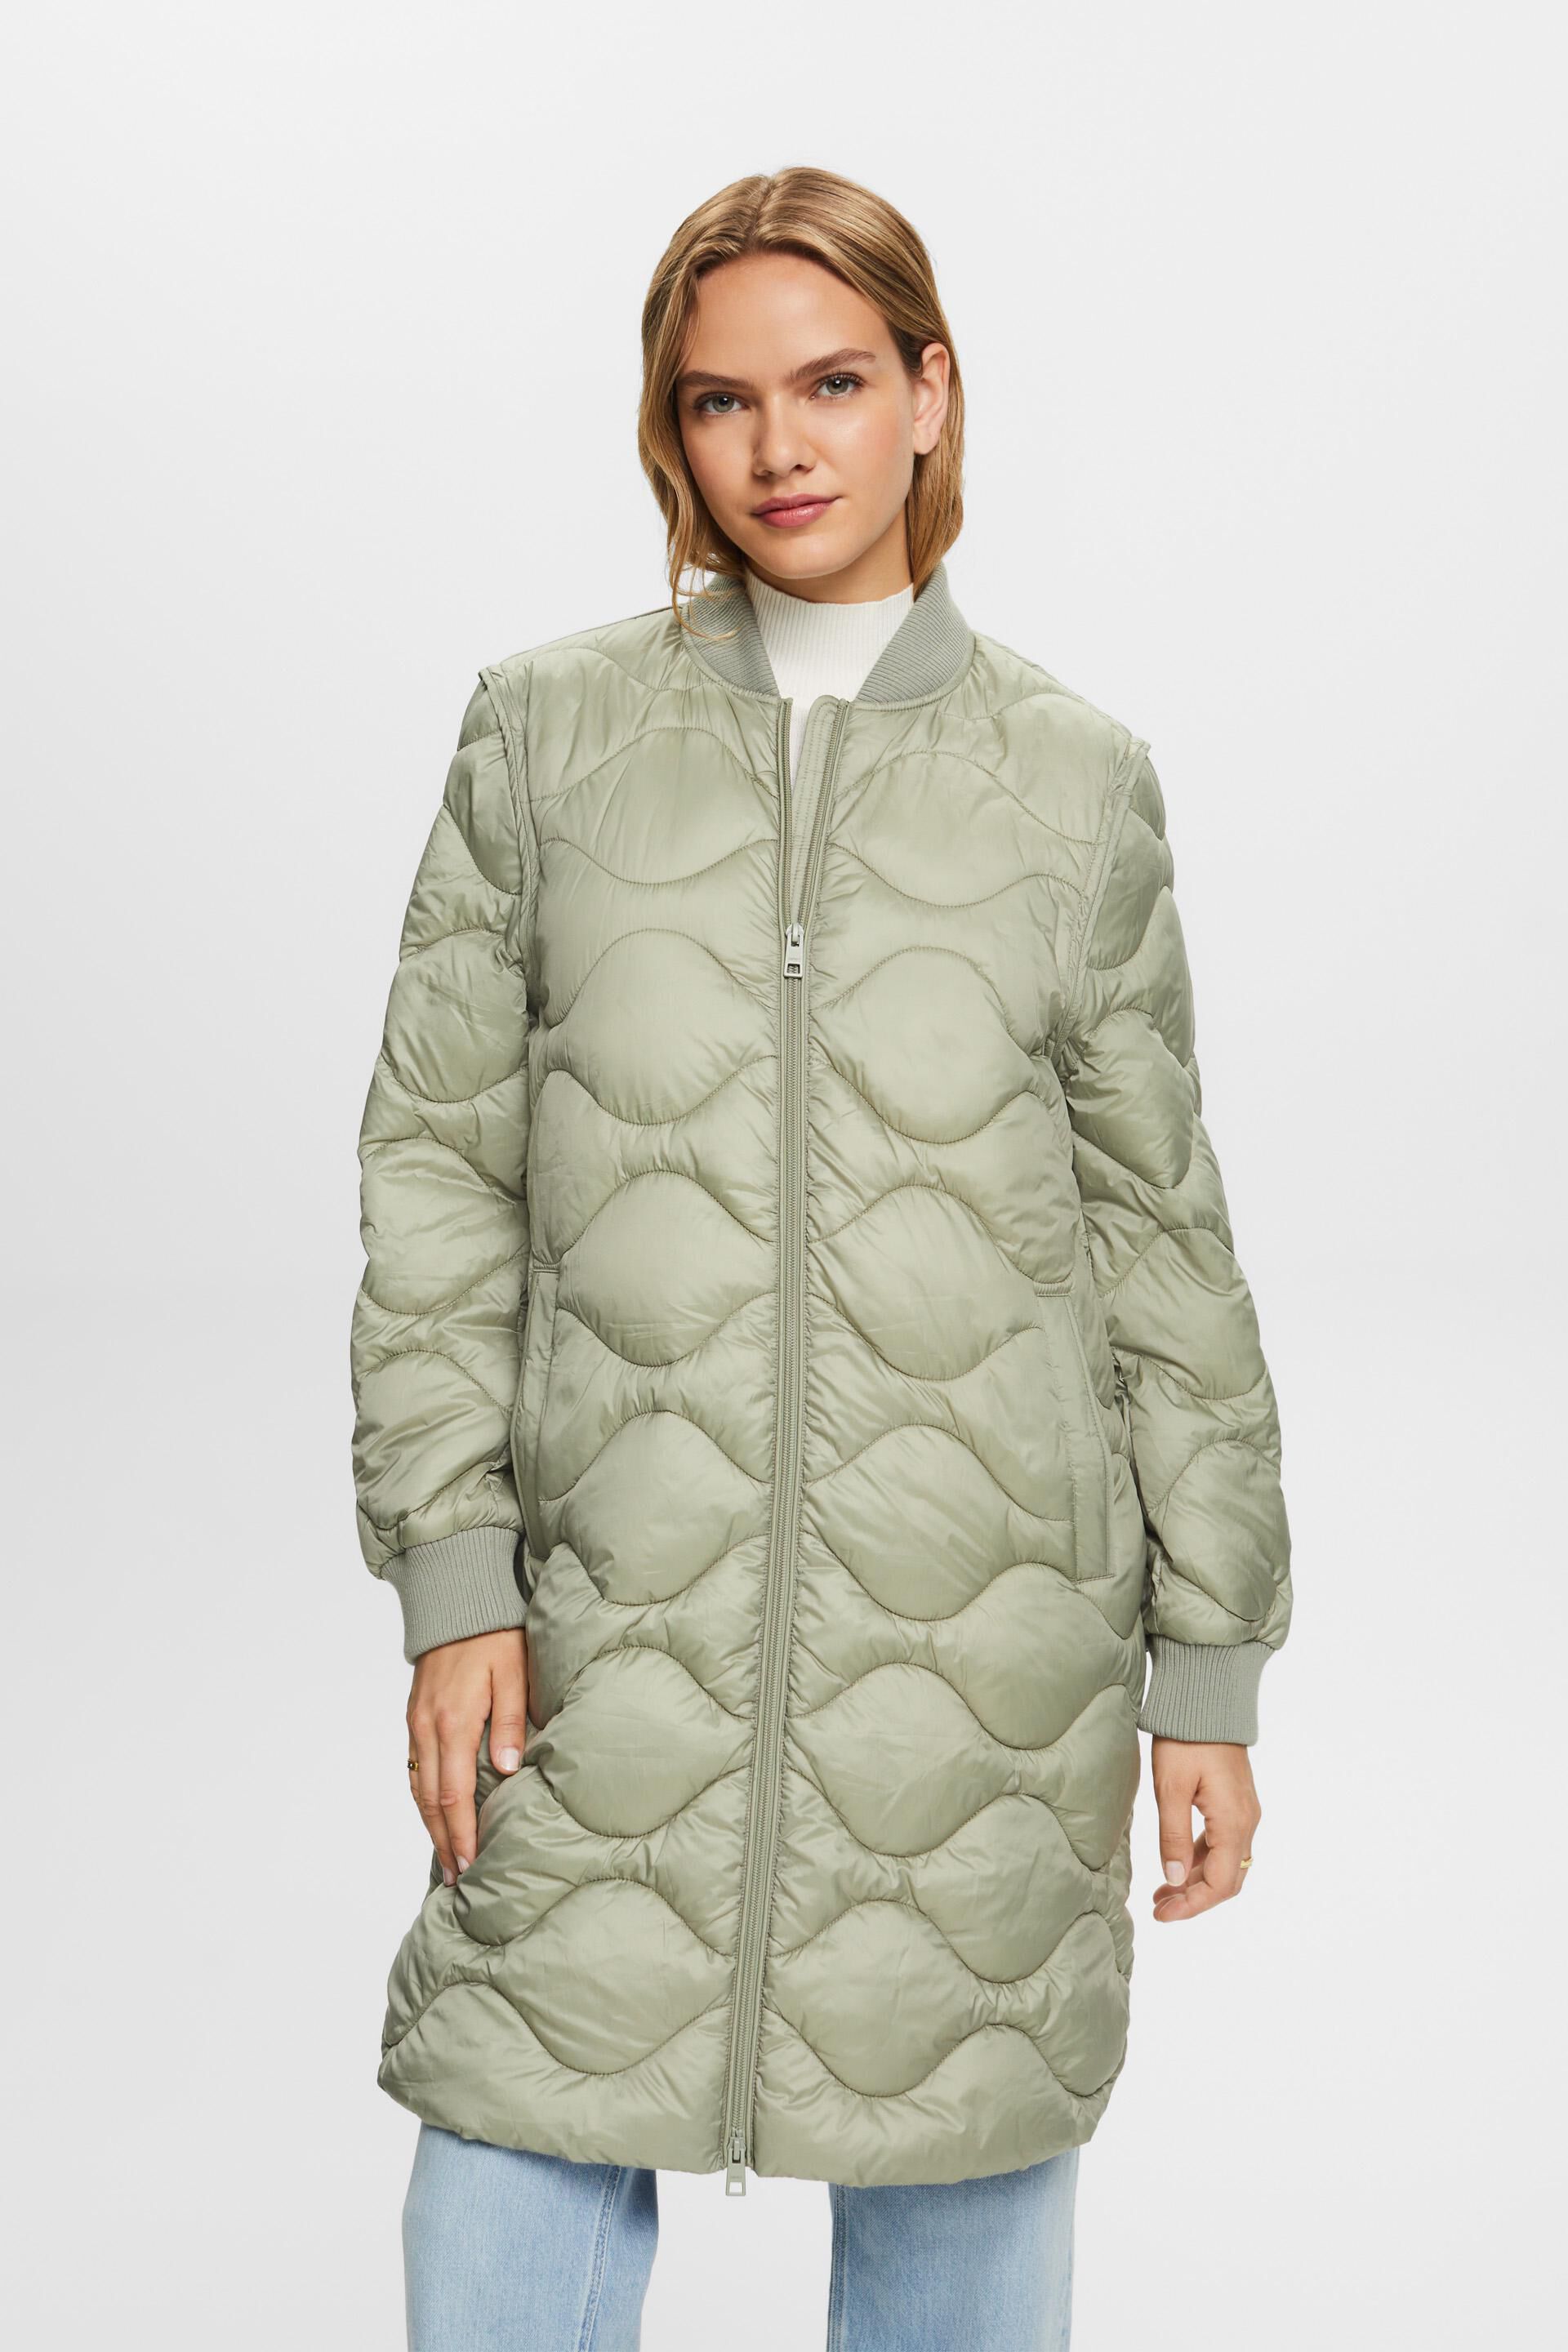 Esprit quilted transformer Recycled: coat